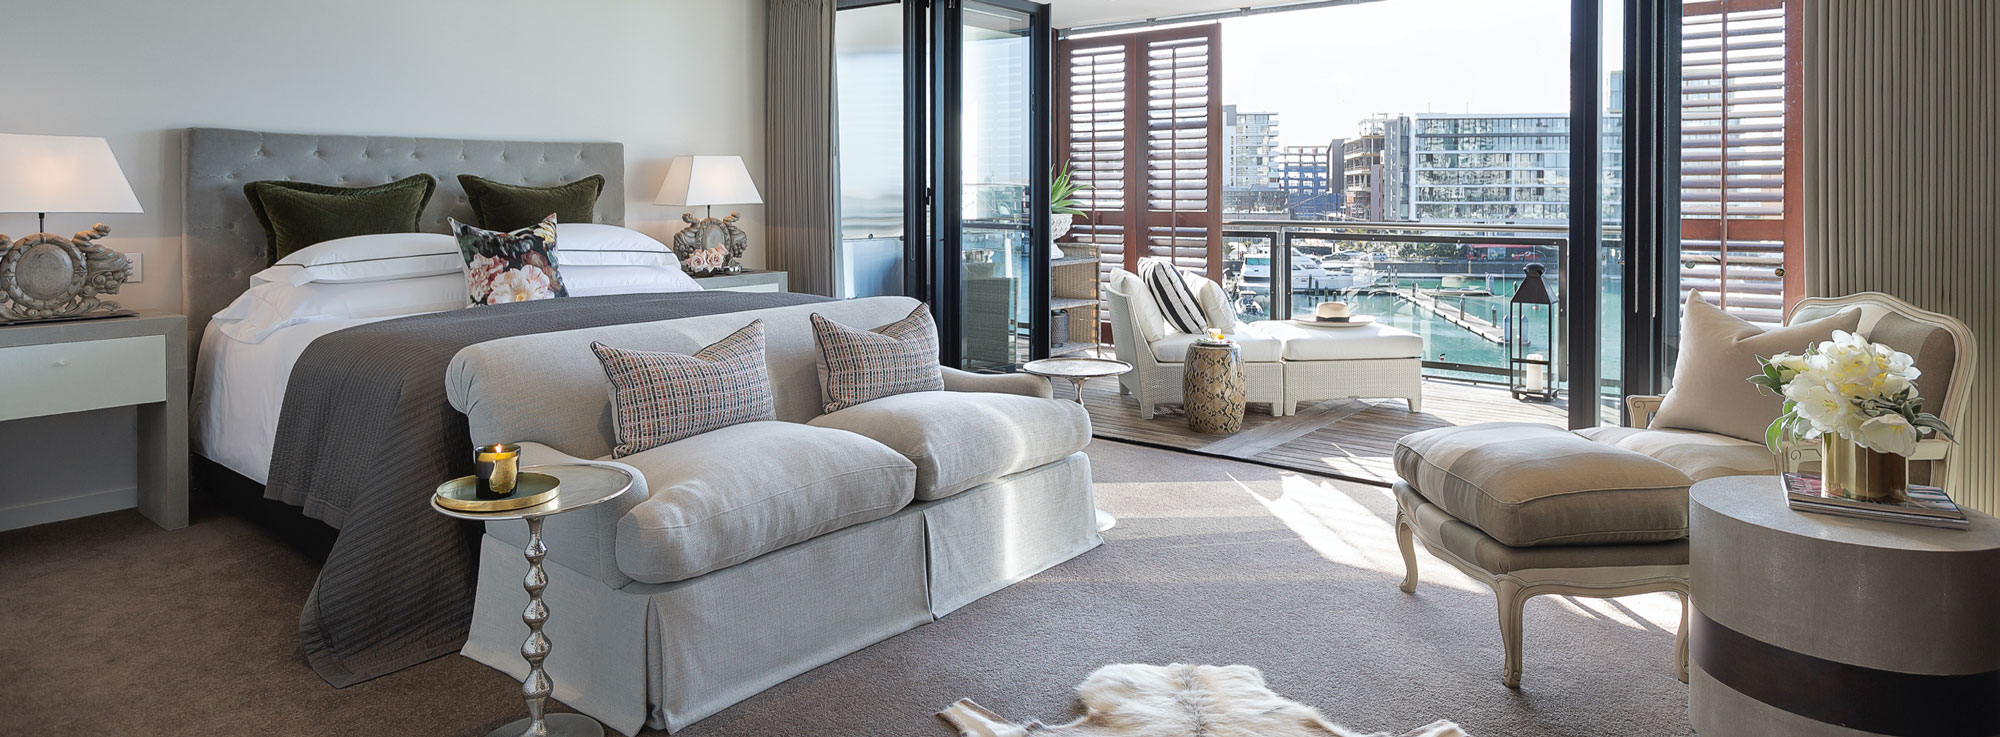 Master Bedroom with Indoor Outdoor Flow & Viaduct Harbour Views | Point Residence Luxury Auckland Waterfront Executive Home for Rent 